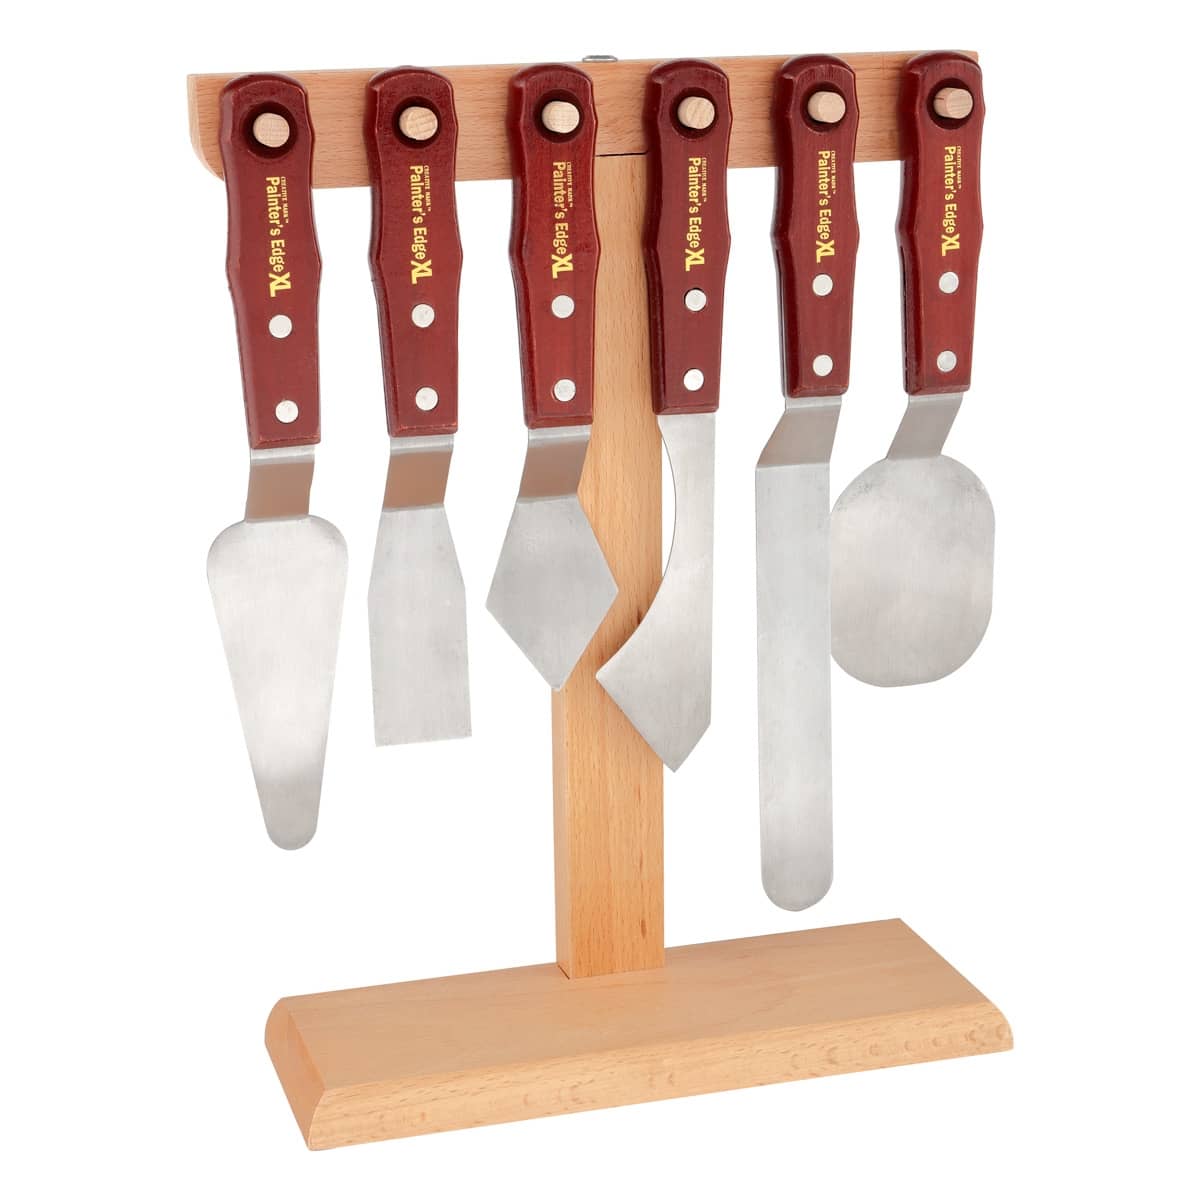 Painter's Edge Xl Palette Knife & Stand Set of 6